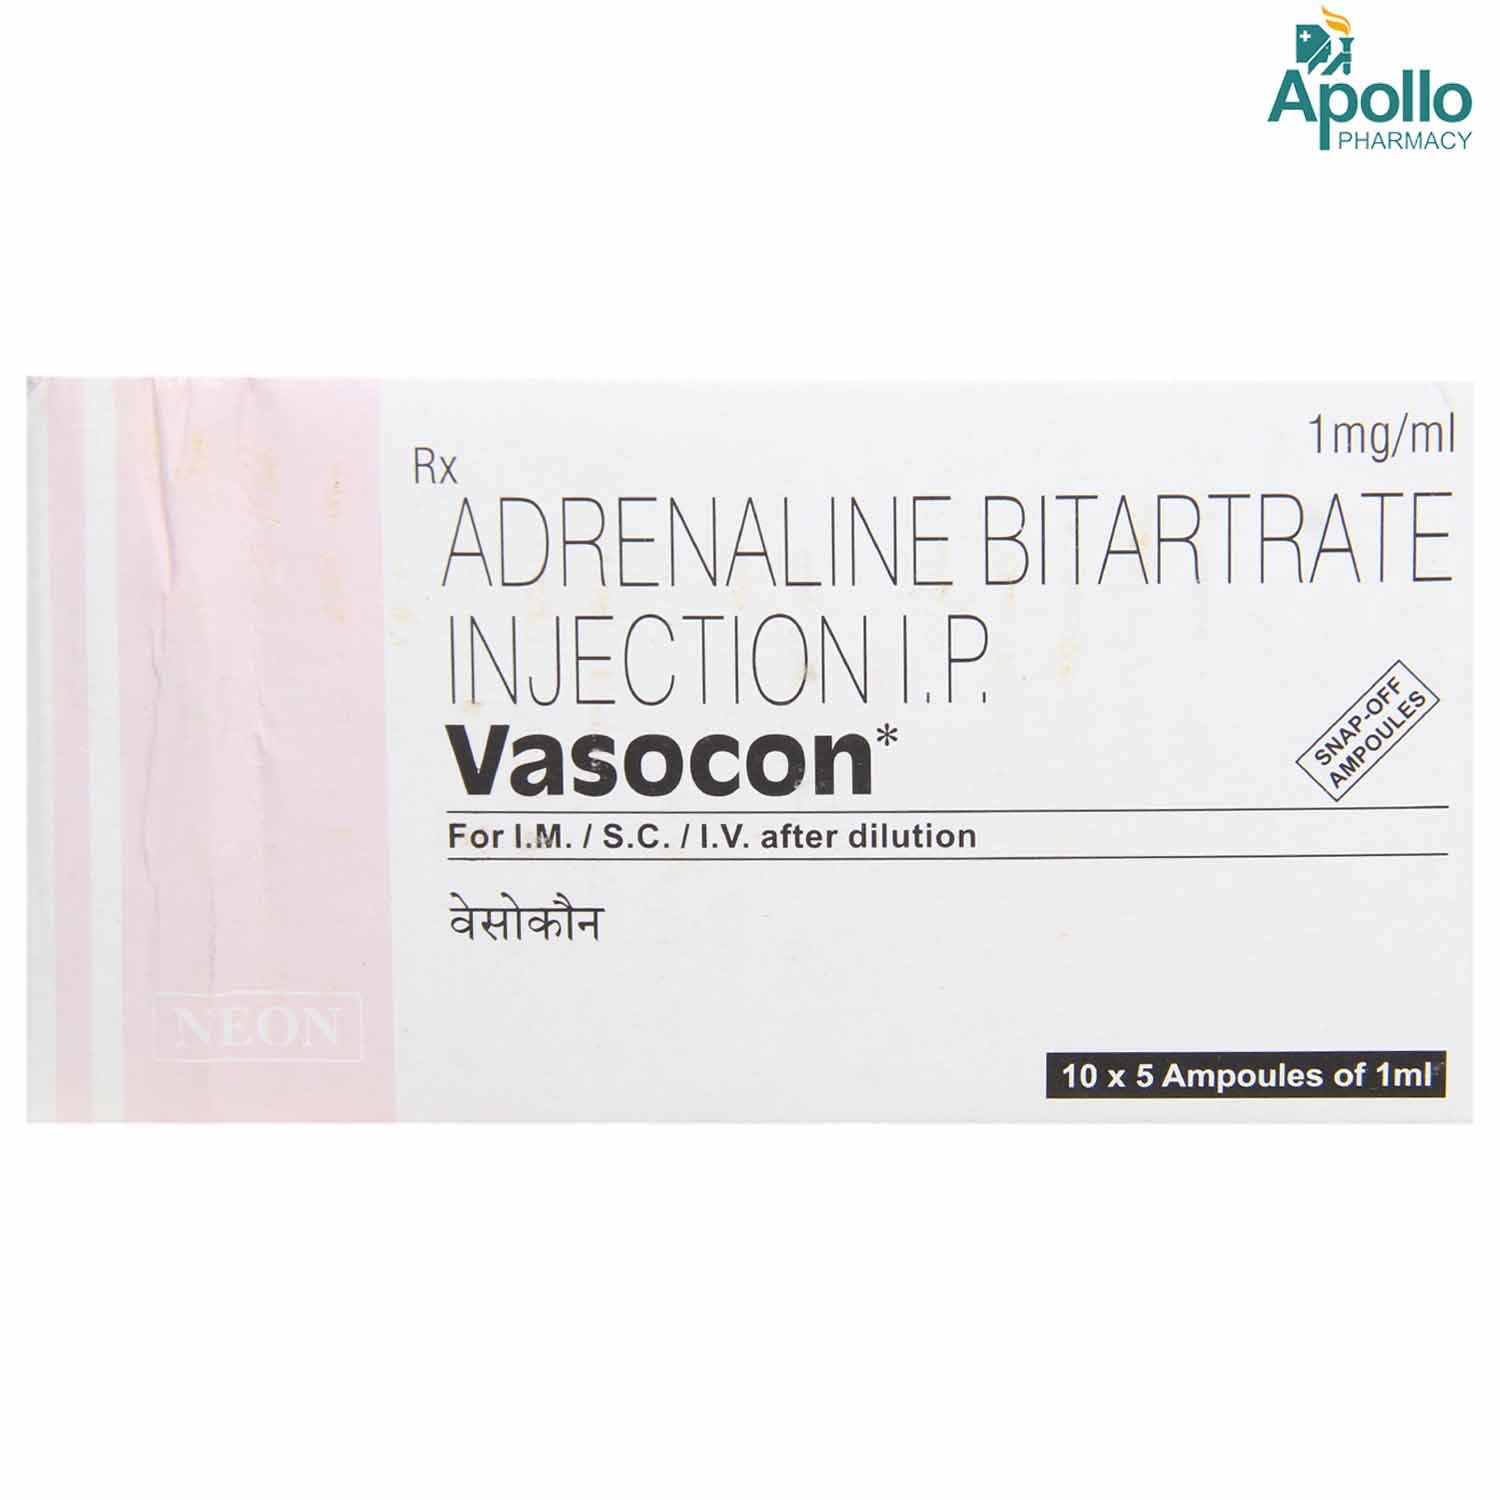 VASOCON ADRENALINE INJECTION Price Uses Side Effects Composition Apollo Pharmacy